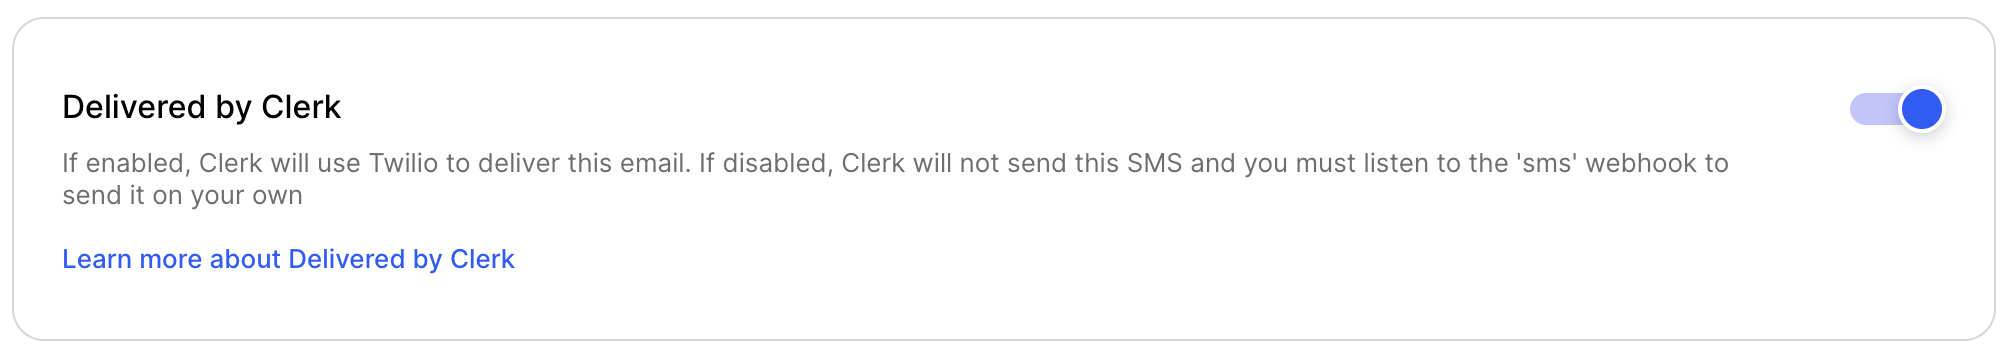 SMS template Delivered by Clerk toggle